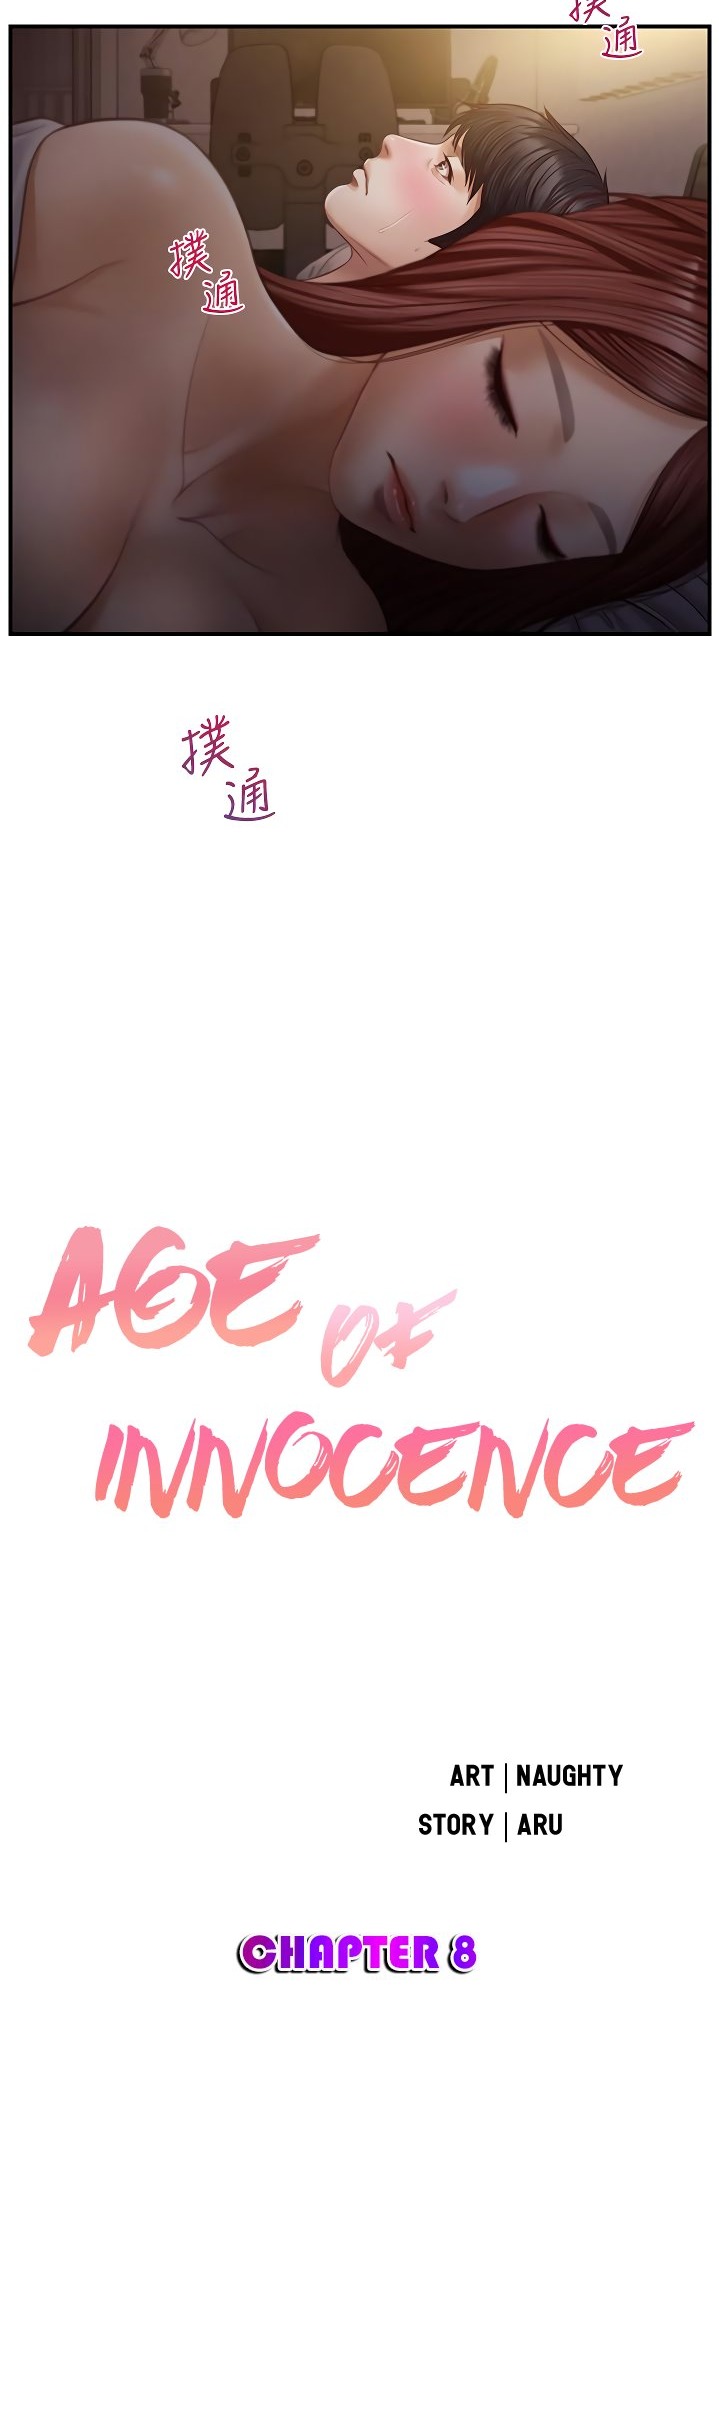 Age of Innocence - Chapter 8 Page 4